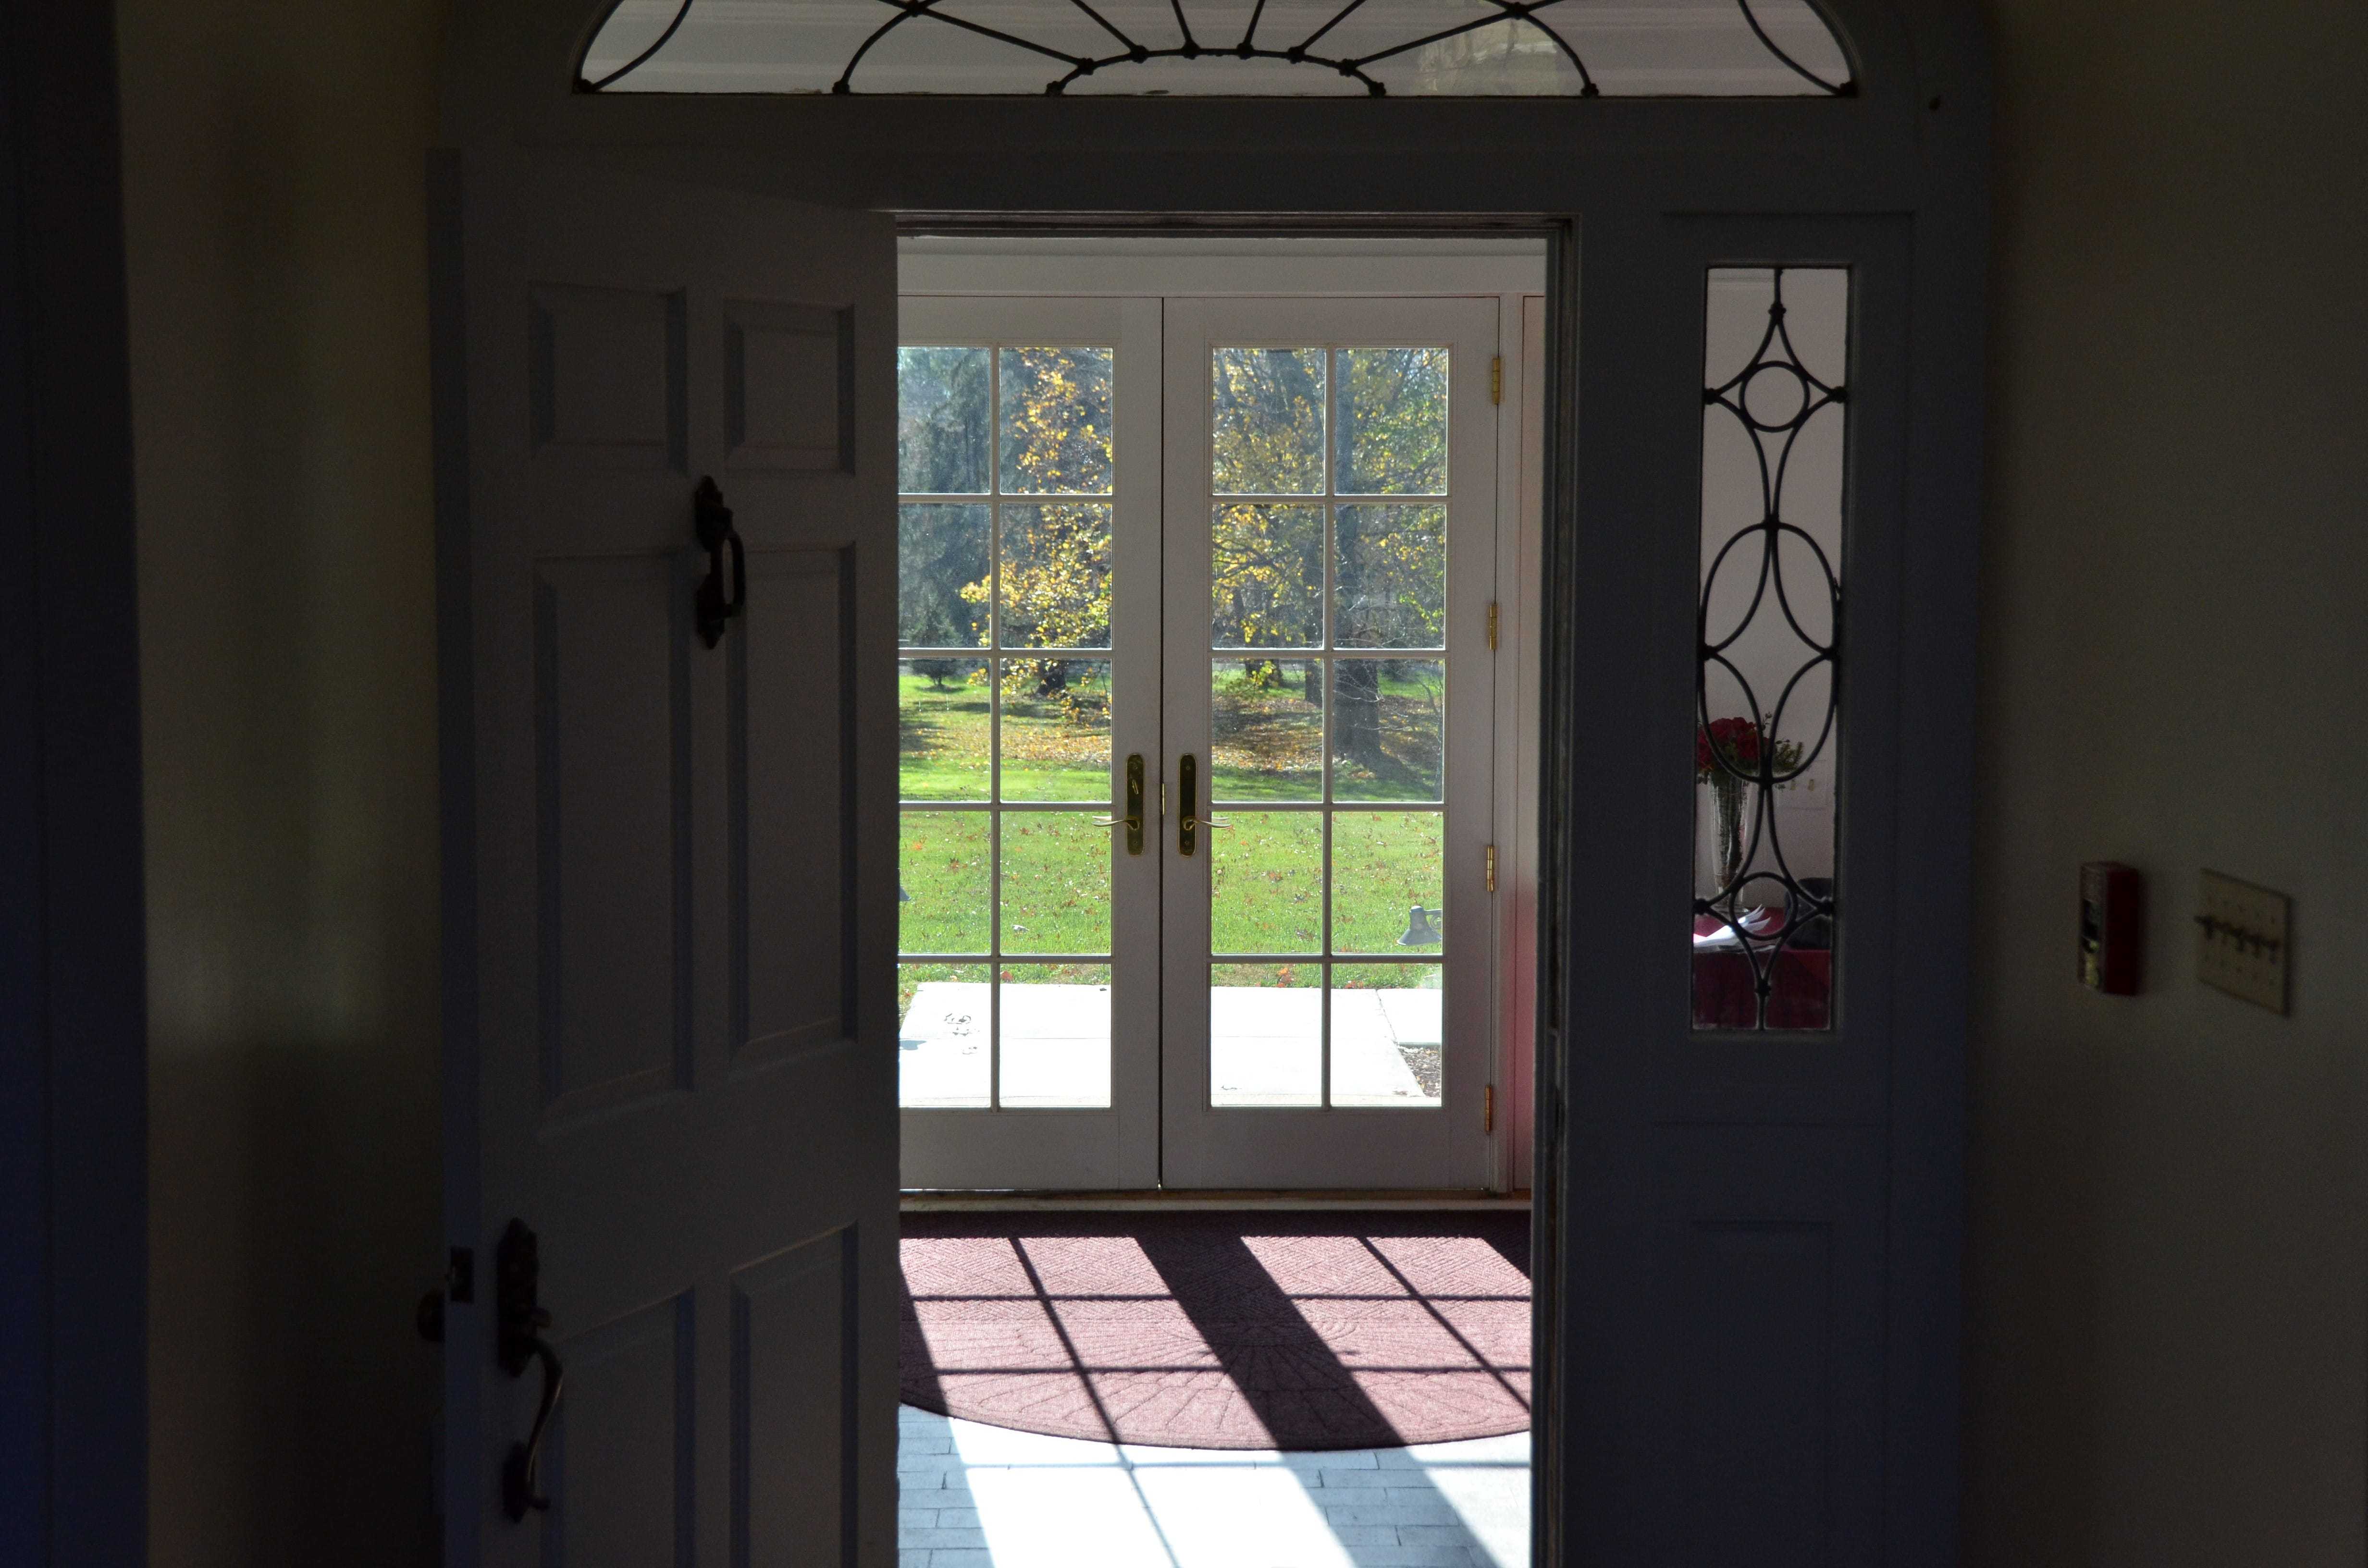 An inside perspective of the entryway of the manor and the pair of french doors.